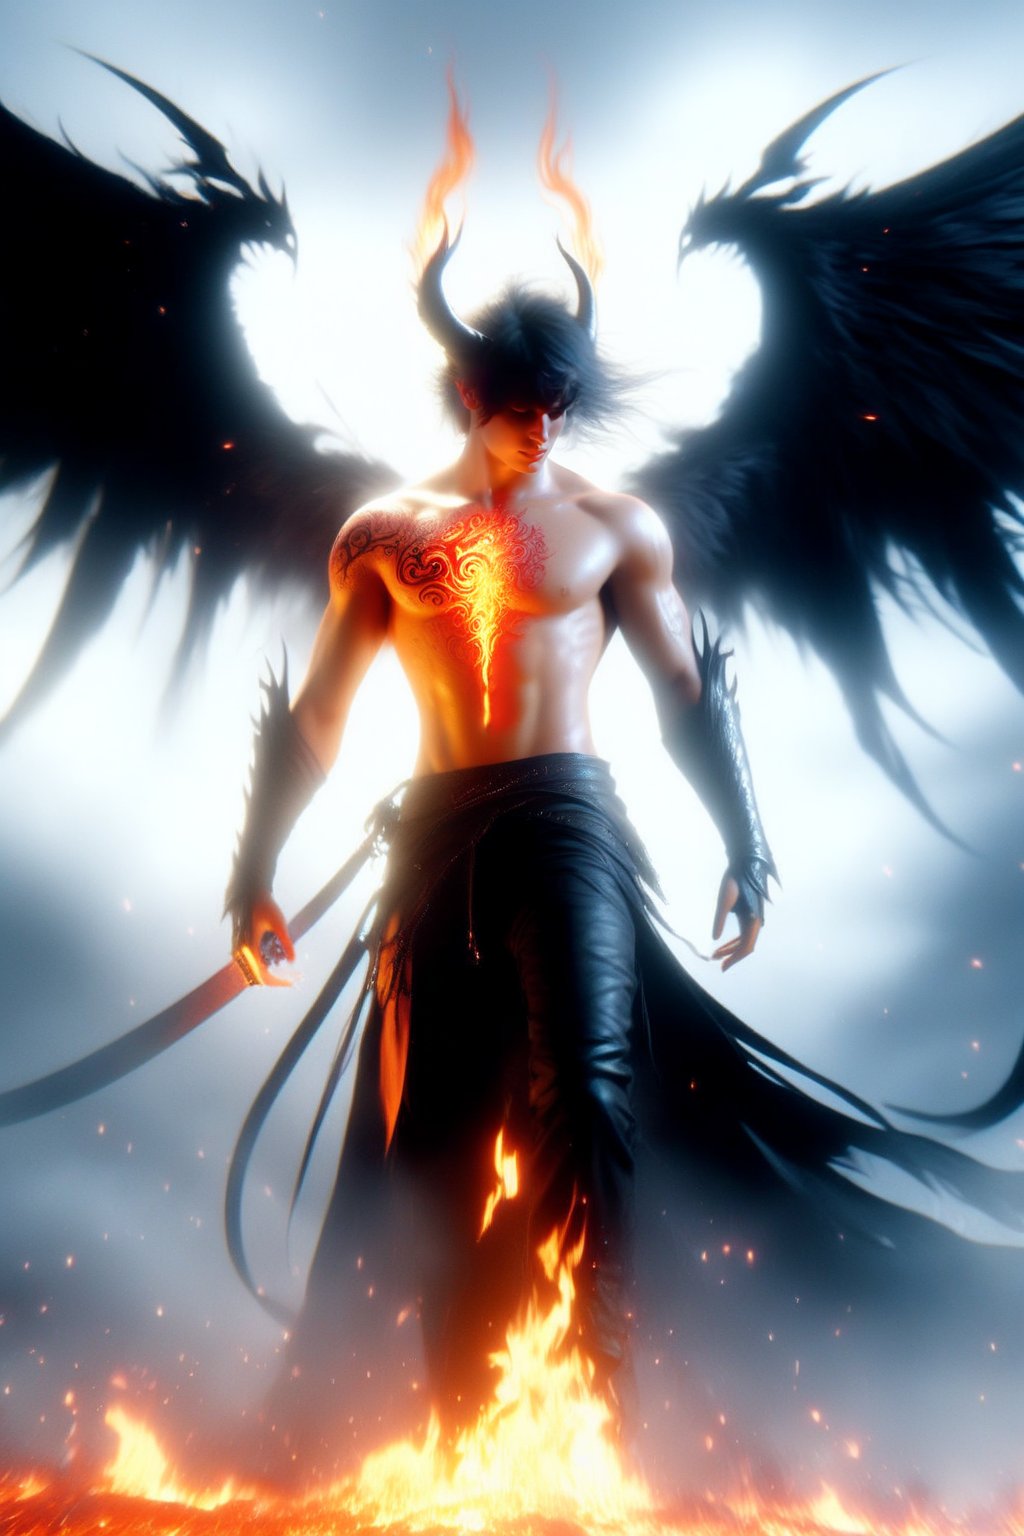 A surreal depiction of a male figure, reminiscent of anime and demon mythology. DonMF1r3XL stands tall in a dark, apocalyptic backdrop, his hot physique accentuated by minimalistic realism. Ghostly beauty radiates from his orange-irised eyes, framed by black eyelids. His body is detailed with red glowing tattoos, as if infused with fiery essence. A black aura swirls around him, amplified by the demon wings ablaze on his back. The open leather jacket reveals a muscular physique, while his right arm bears spikes like a battle-ready warrior. Mulleted hair flows in every direction, as tears of black ink stream down his face, evoking a sense of sorrow and desperation. Amidst this hellish scene, he stands with shullet-like determination, his dragon body seemingly forged from the very flames that consume him.